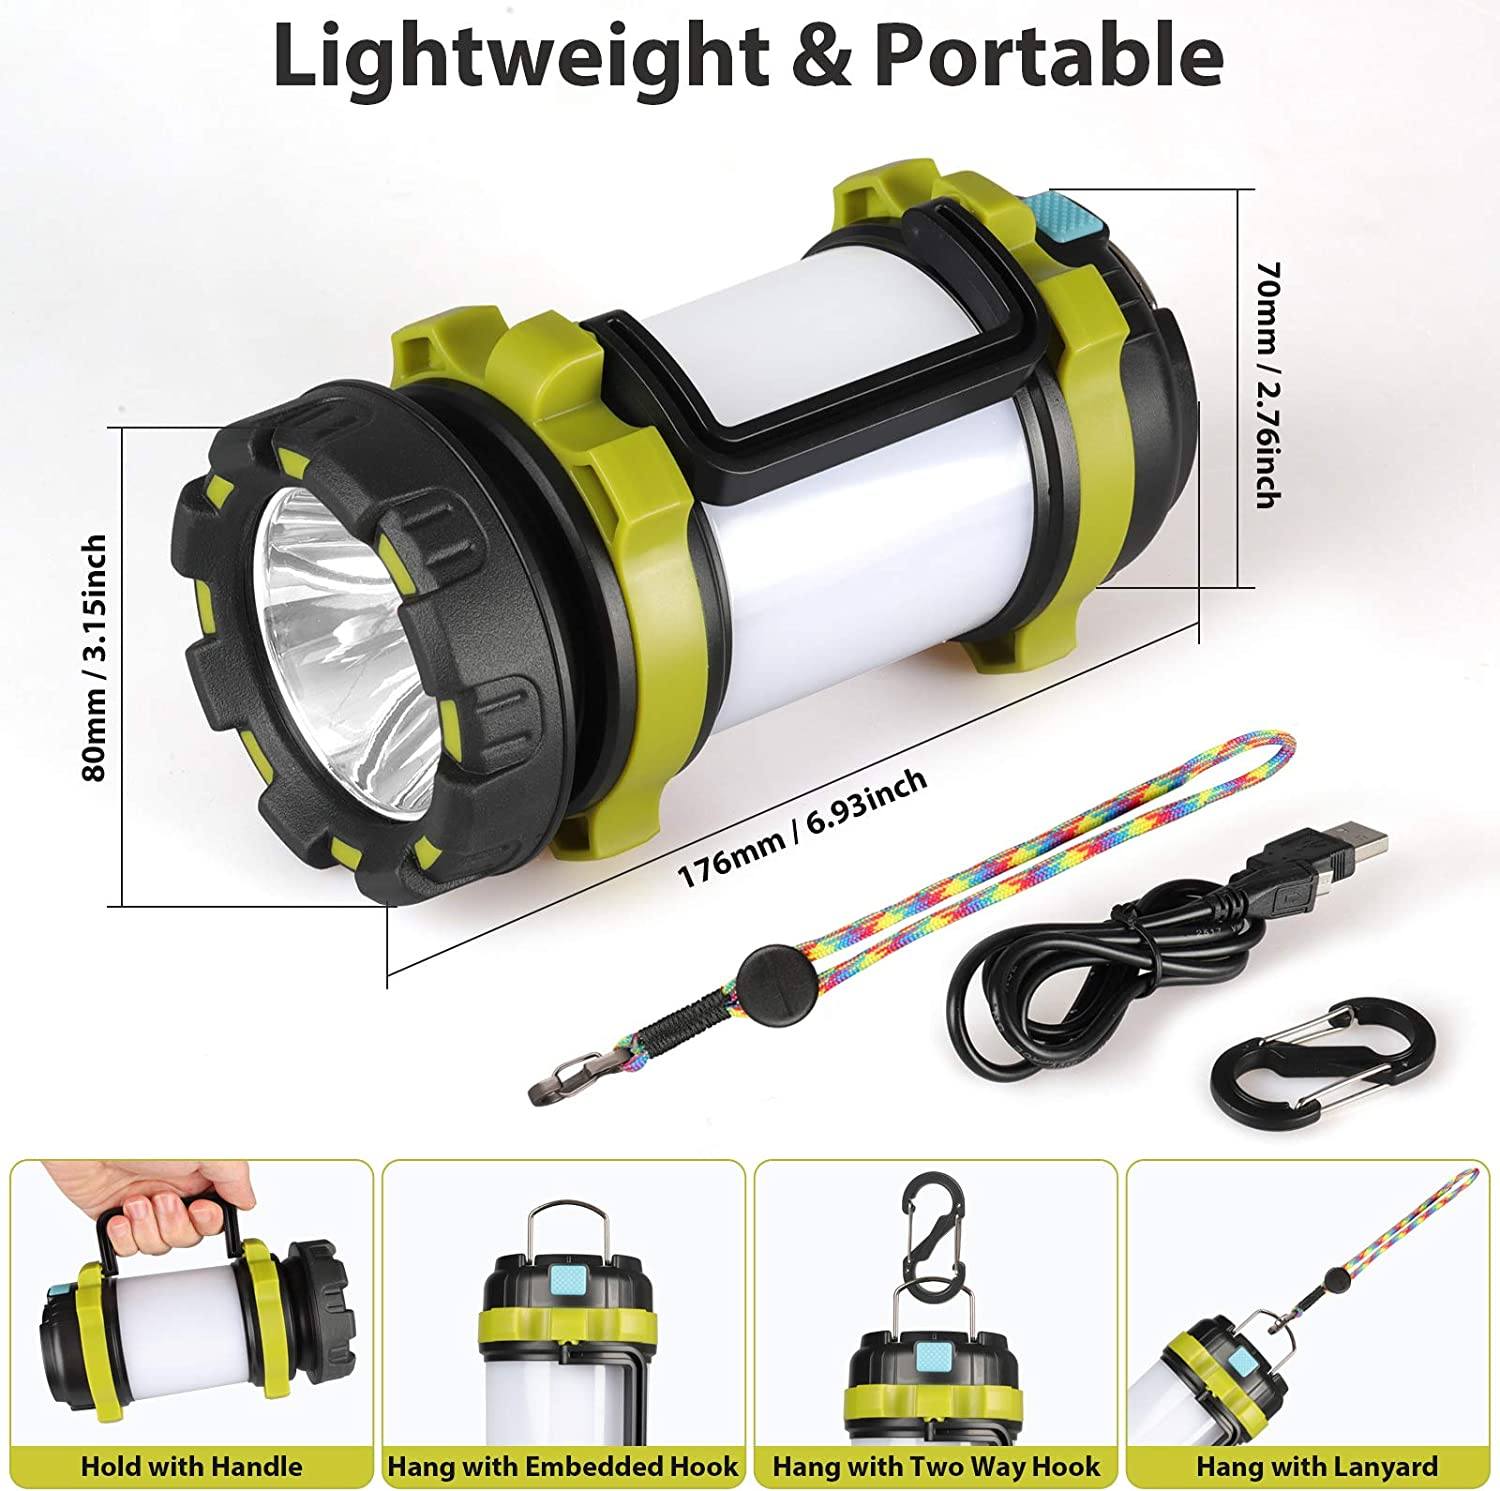 AlpsWolf Camping Lantern, 4000 Capacity Power Bank,6 Modes, IPX4  Waterproof, USB Charging Cable Included